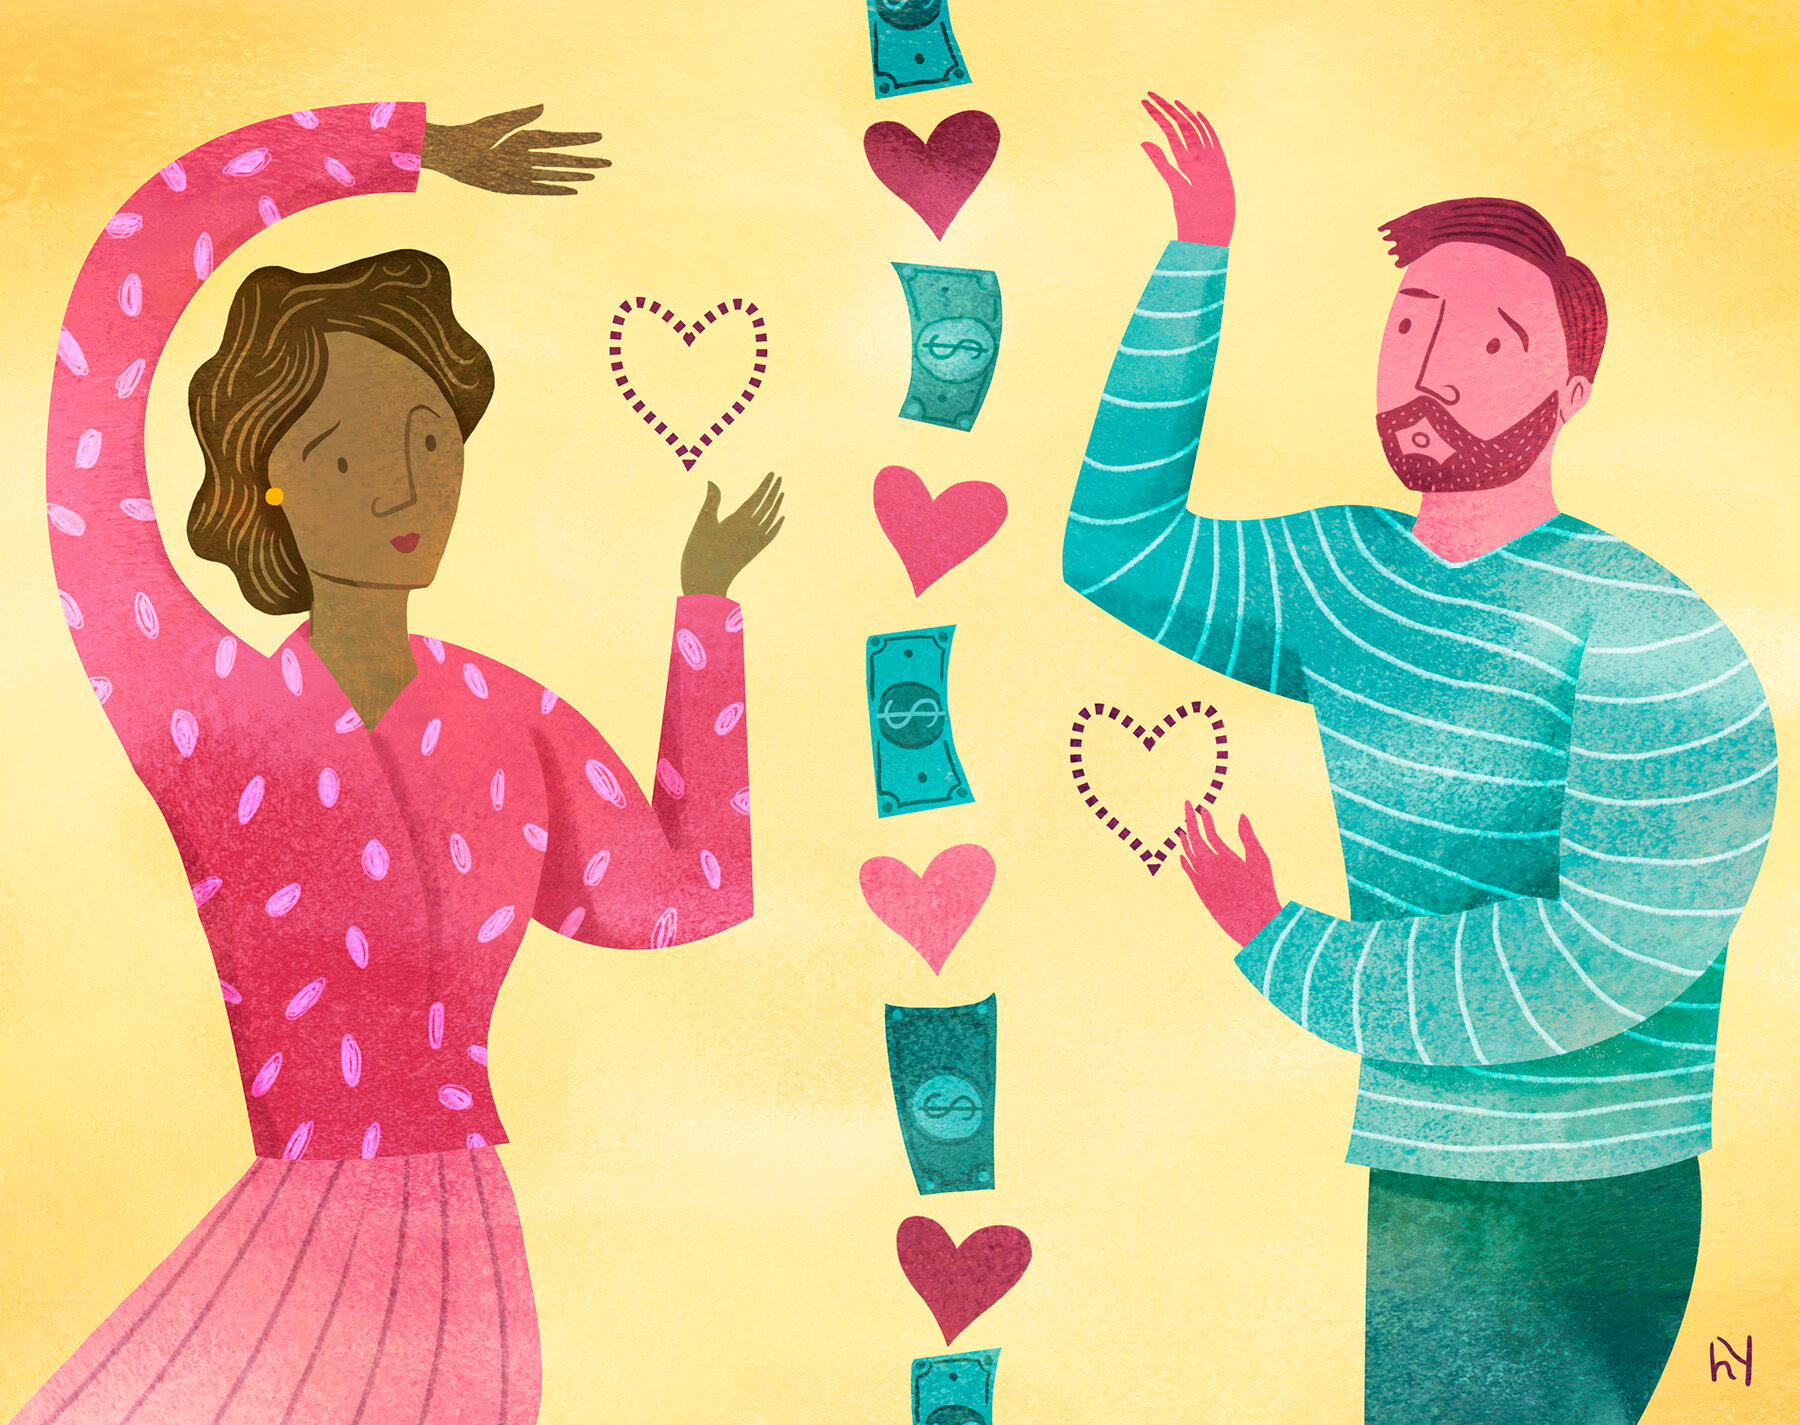 Finding Love in the Modern World: The Rise of Professional Matchmaking Services